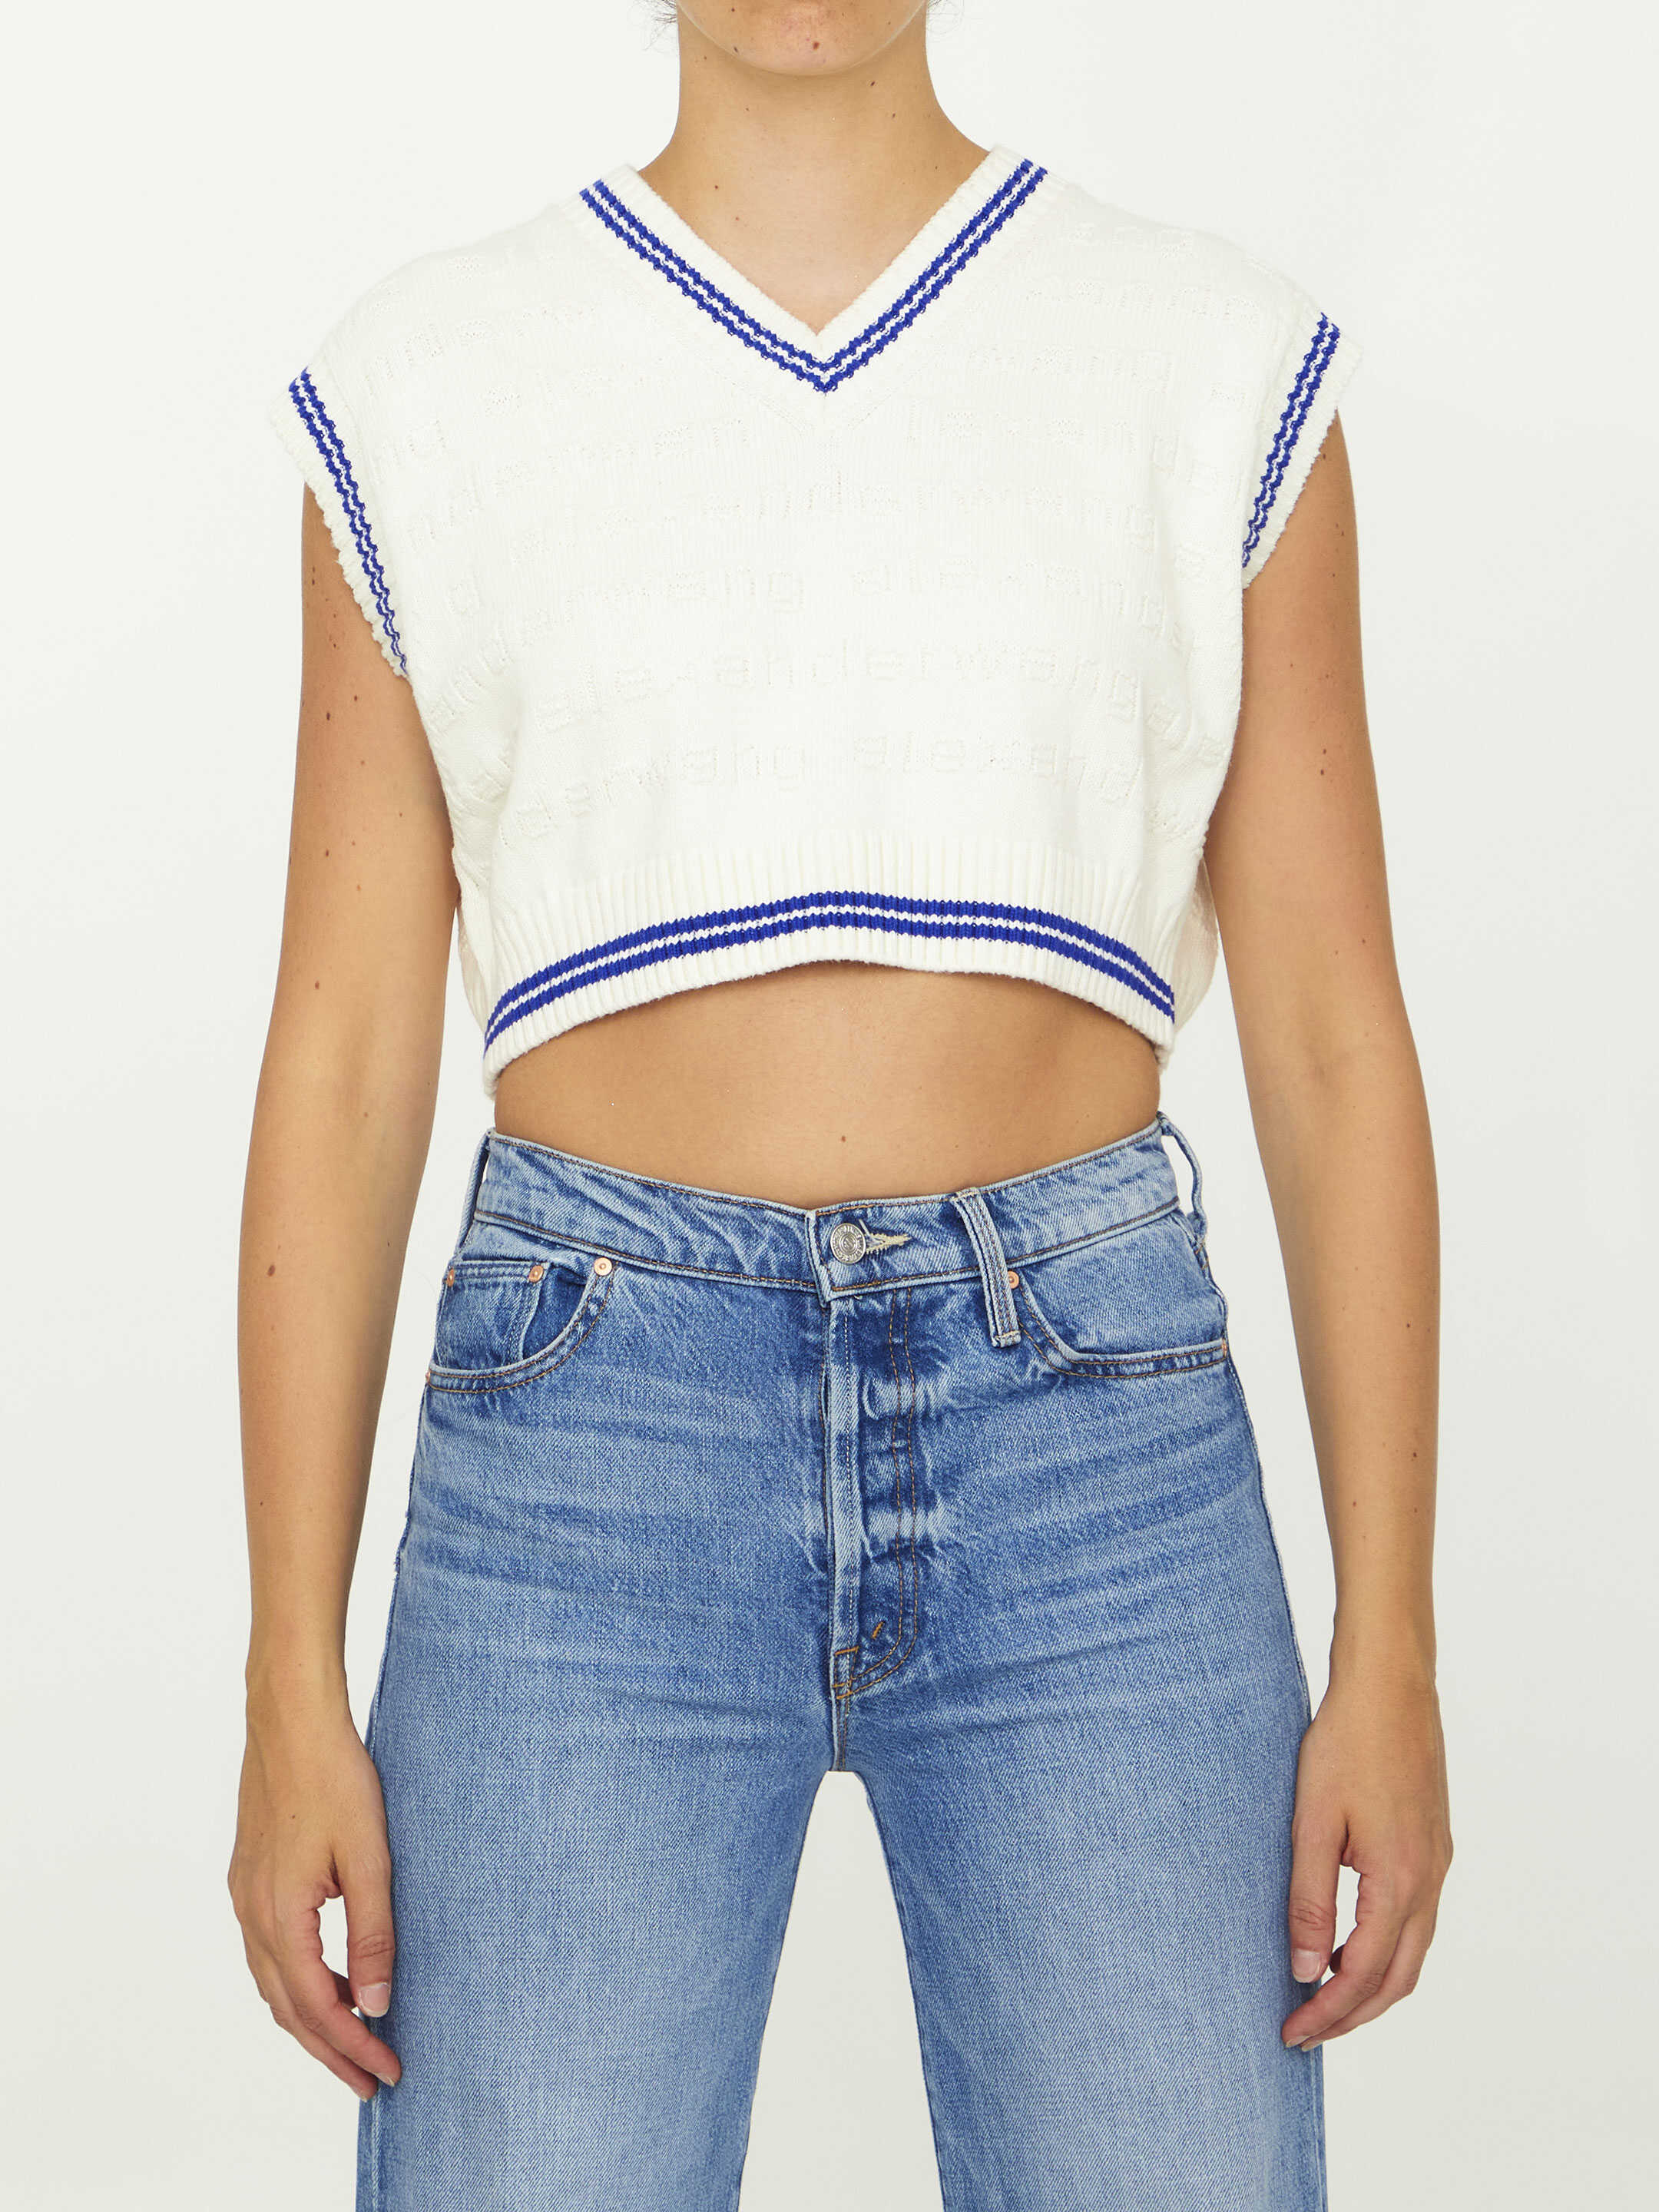 Alexander Wang Cropped Vest In Compact Cotton WHITE